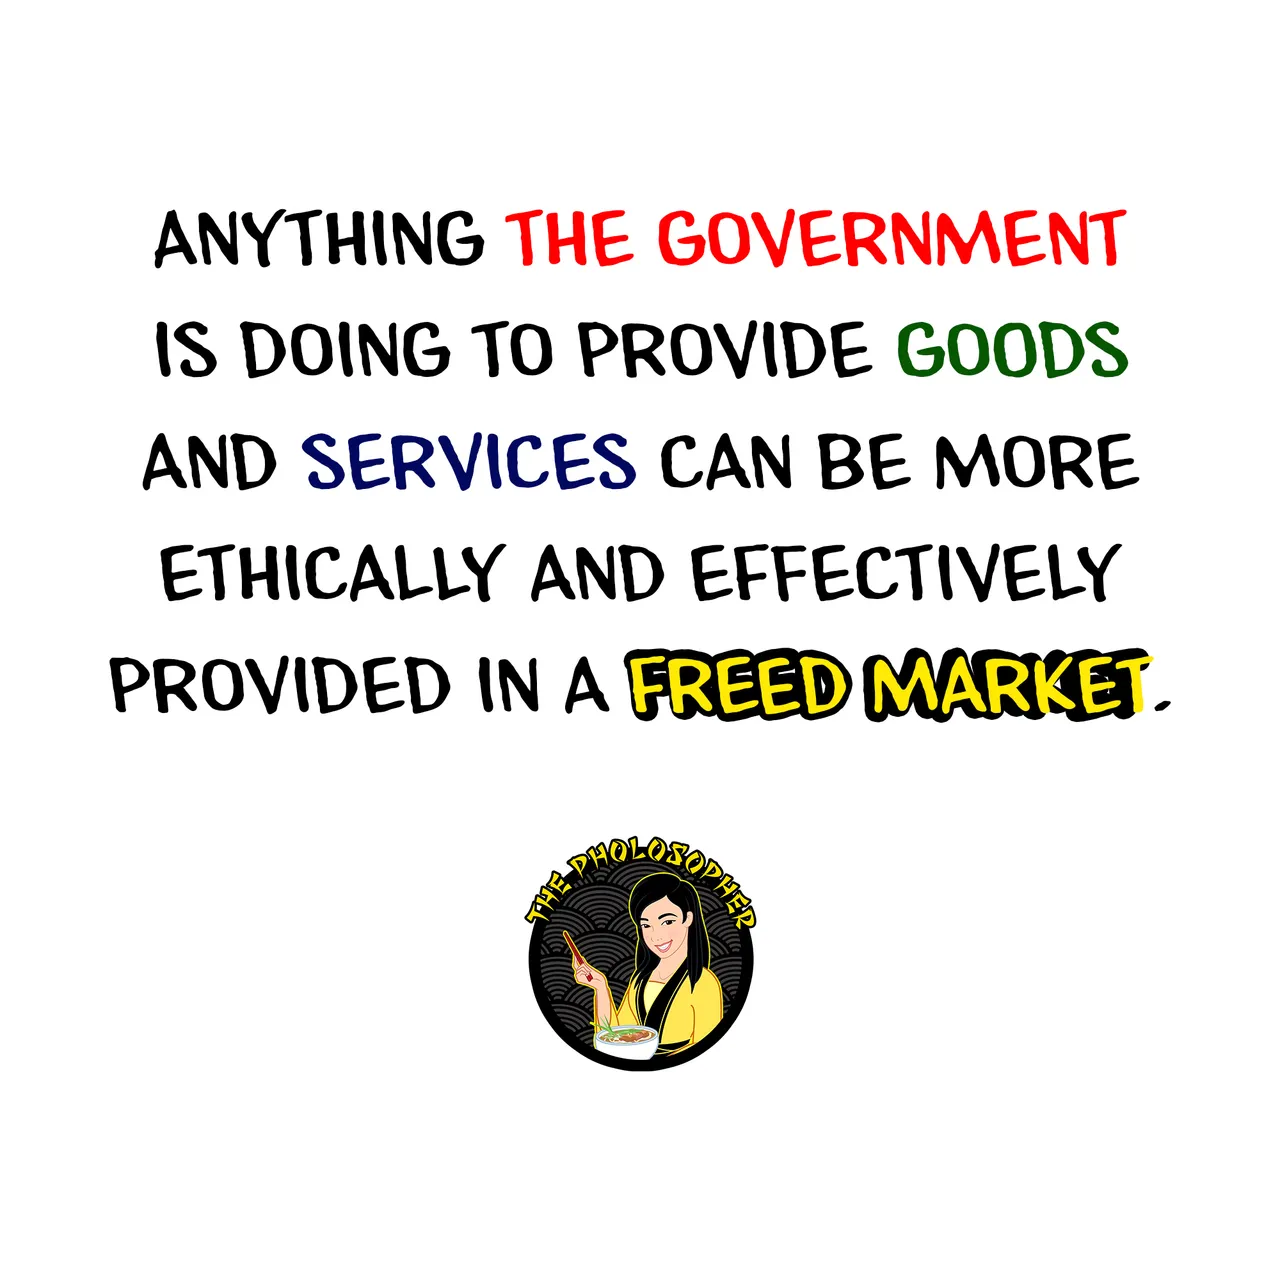 goods_and_services_provided_better.jpg